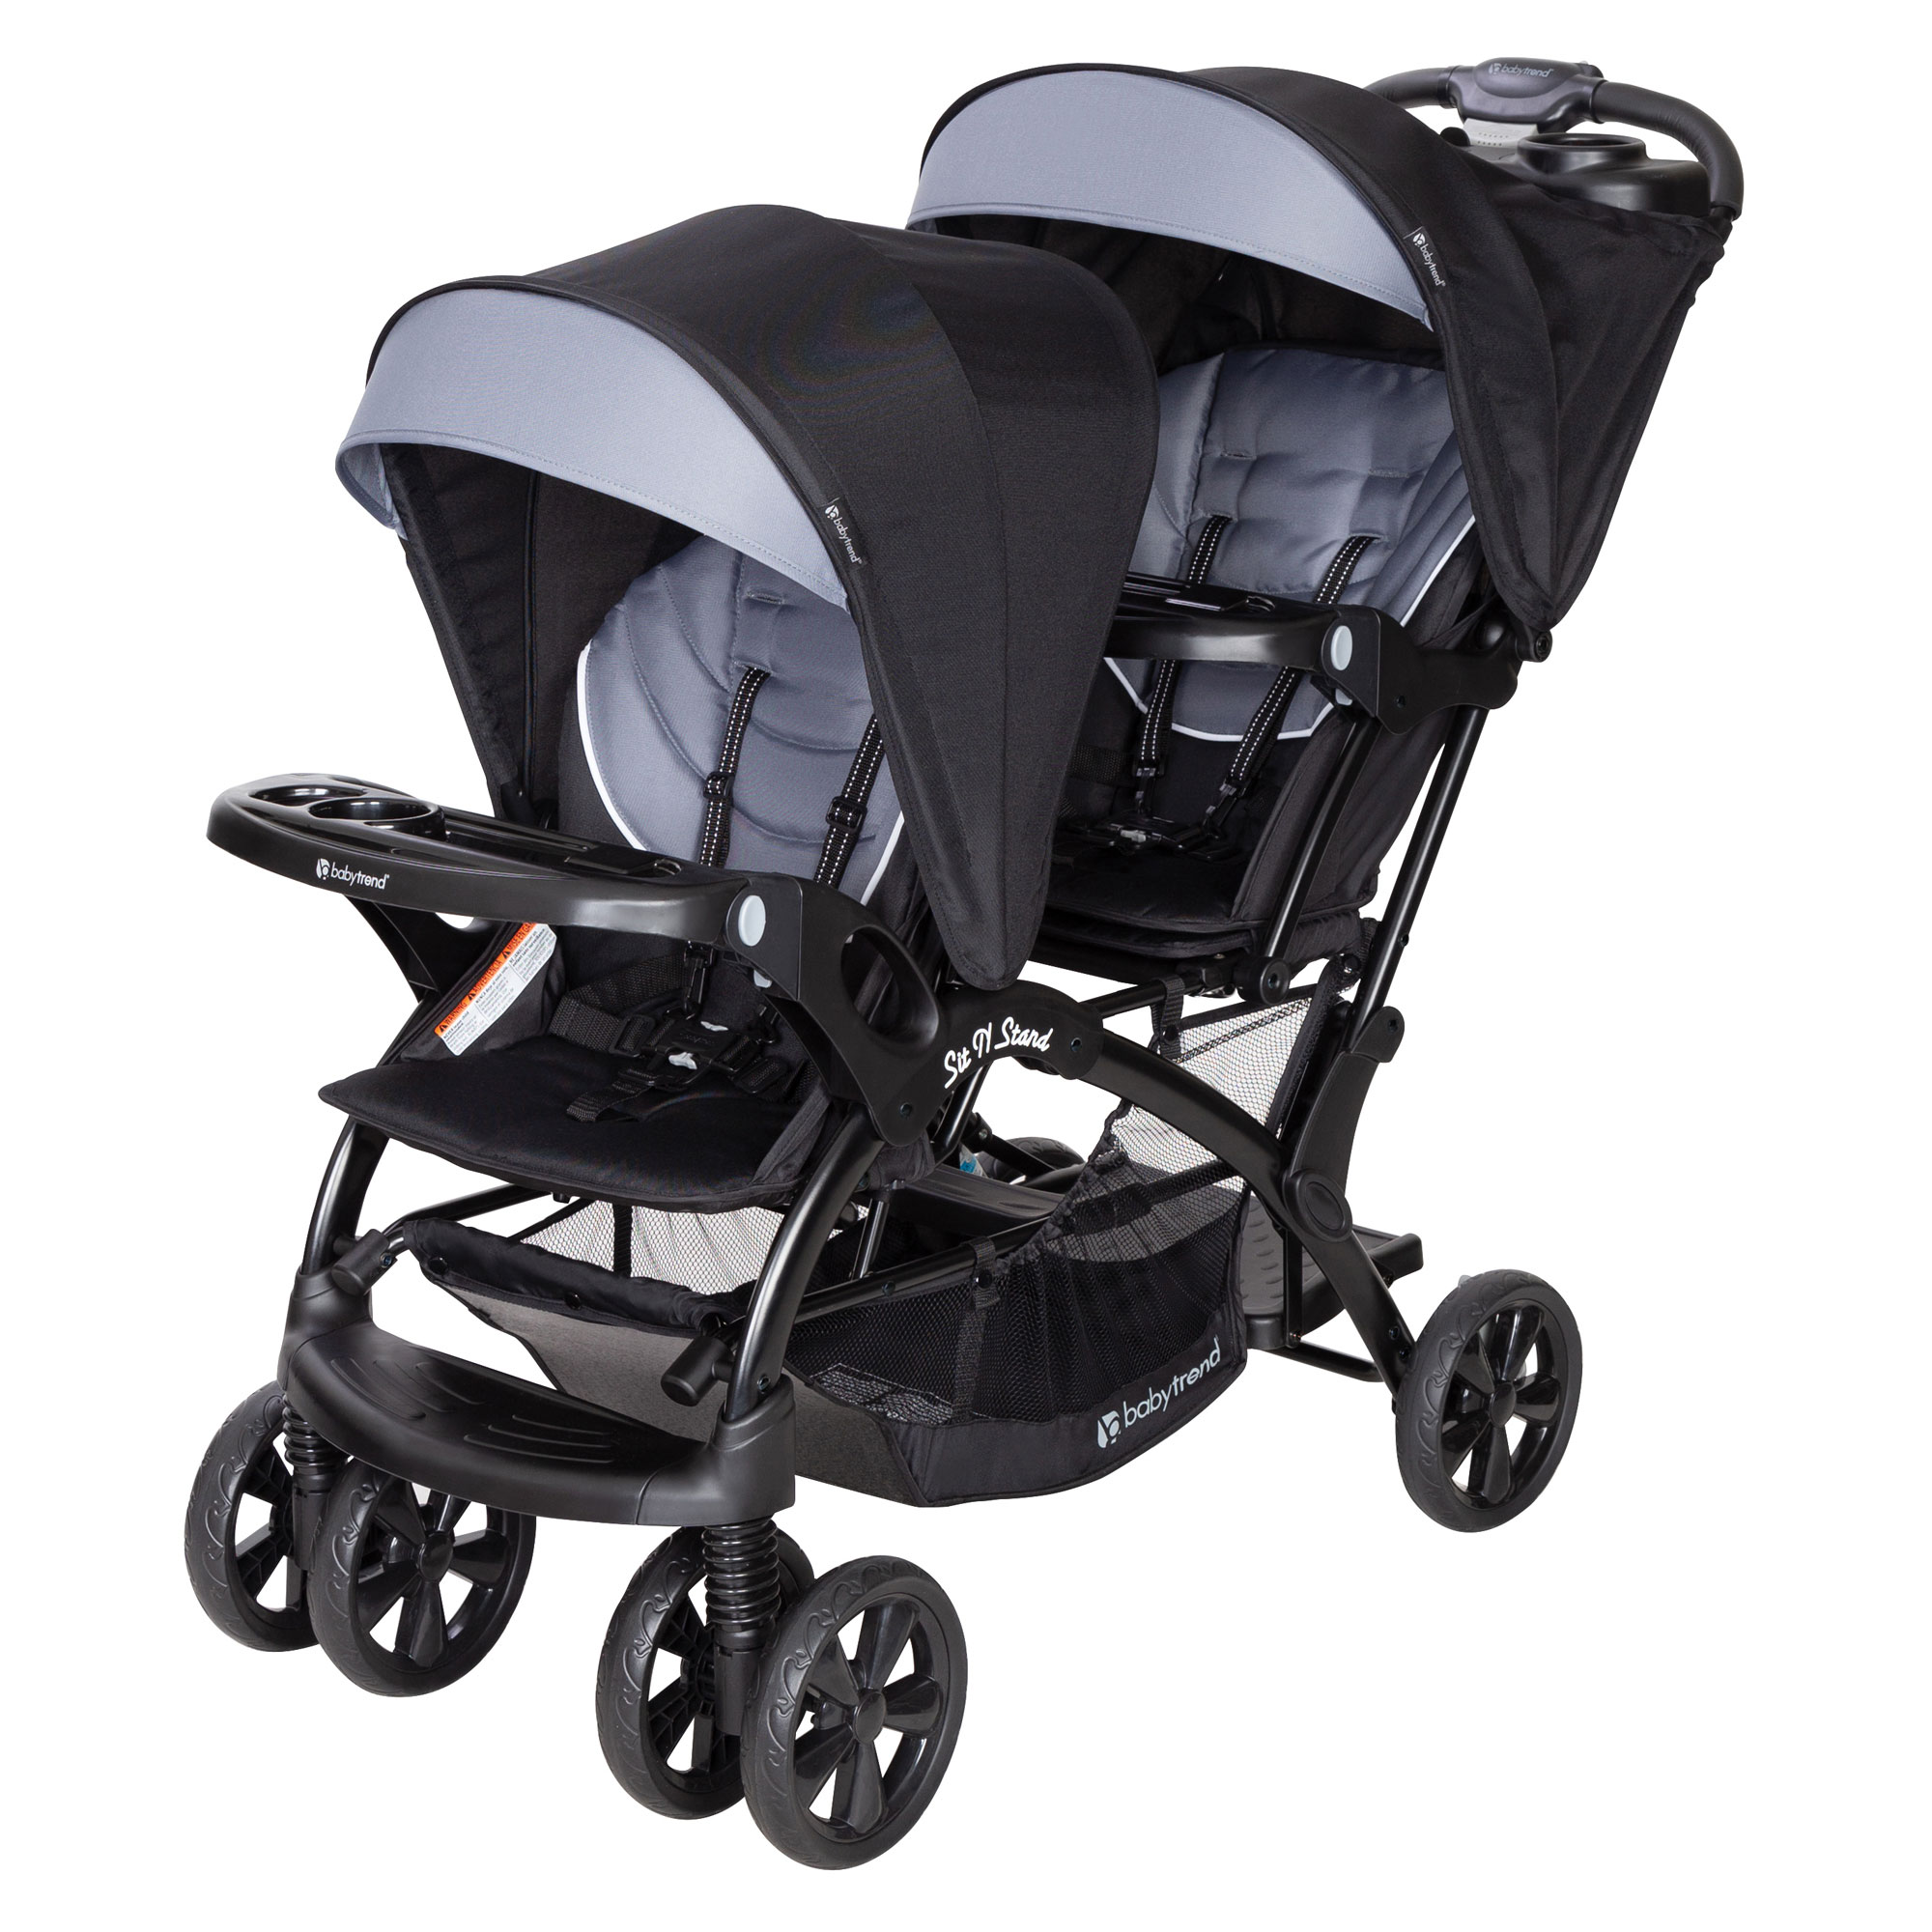 where can i find a cheap double stroller